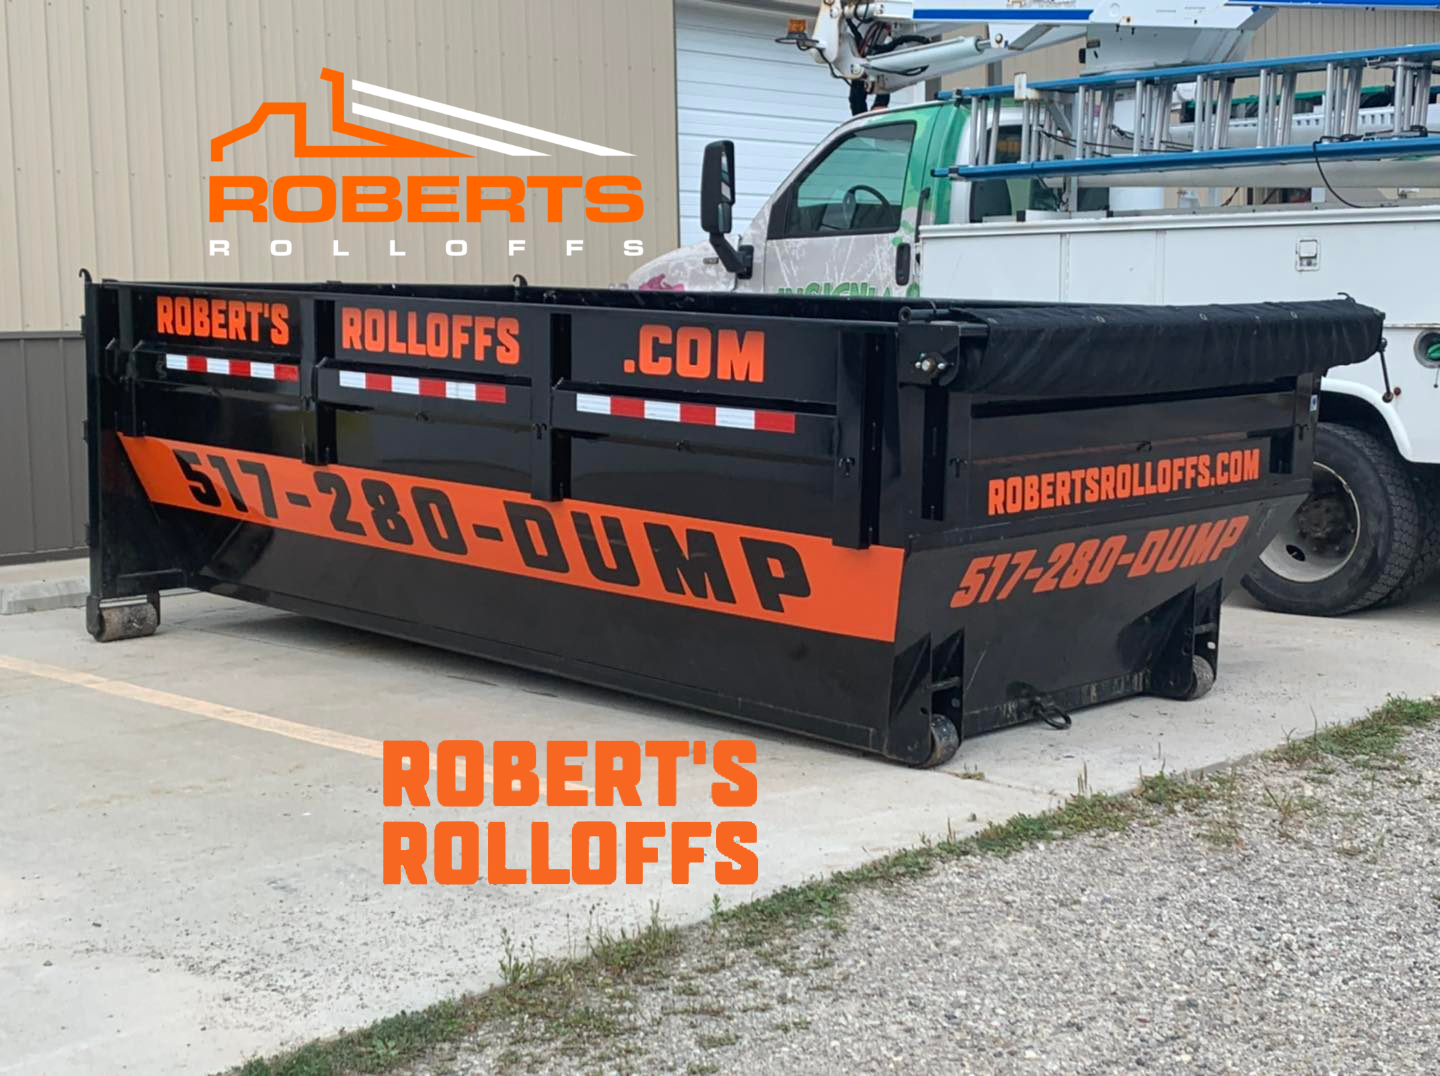 Roofers Book our Southeast Michigan Construction Dumpster Rental Options For All Projects